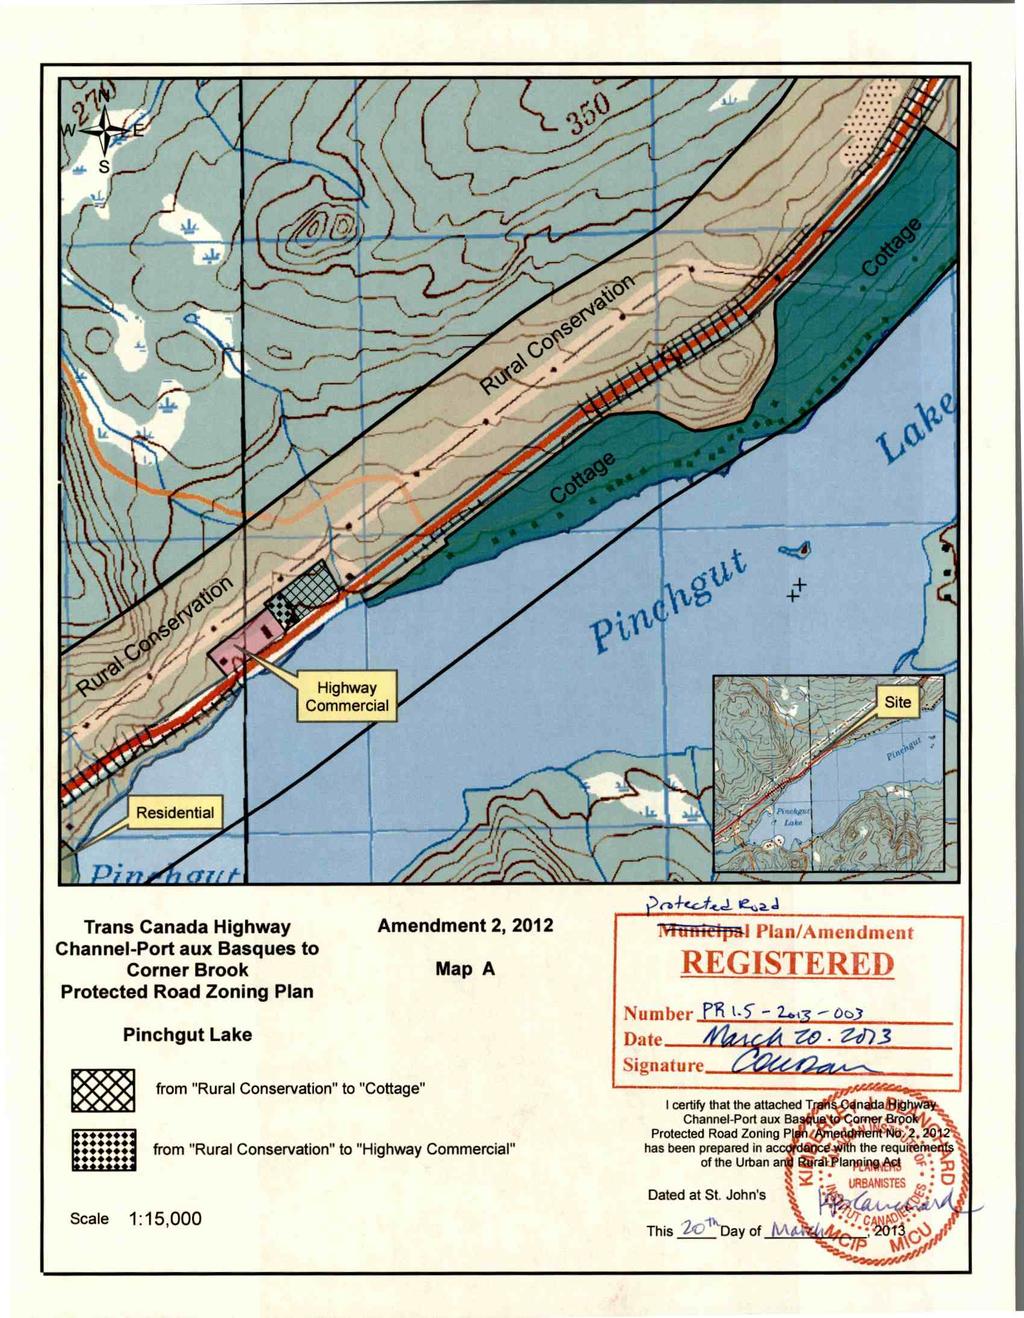 Trans Canada Highway Channel-Port aux Basques to Corner Brook Protected Road Zoning Plan 41 111 4I I.